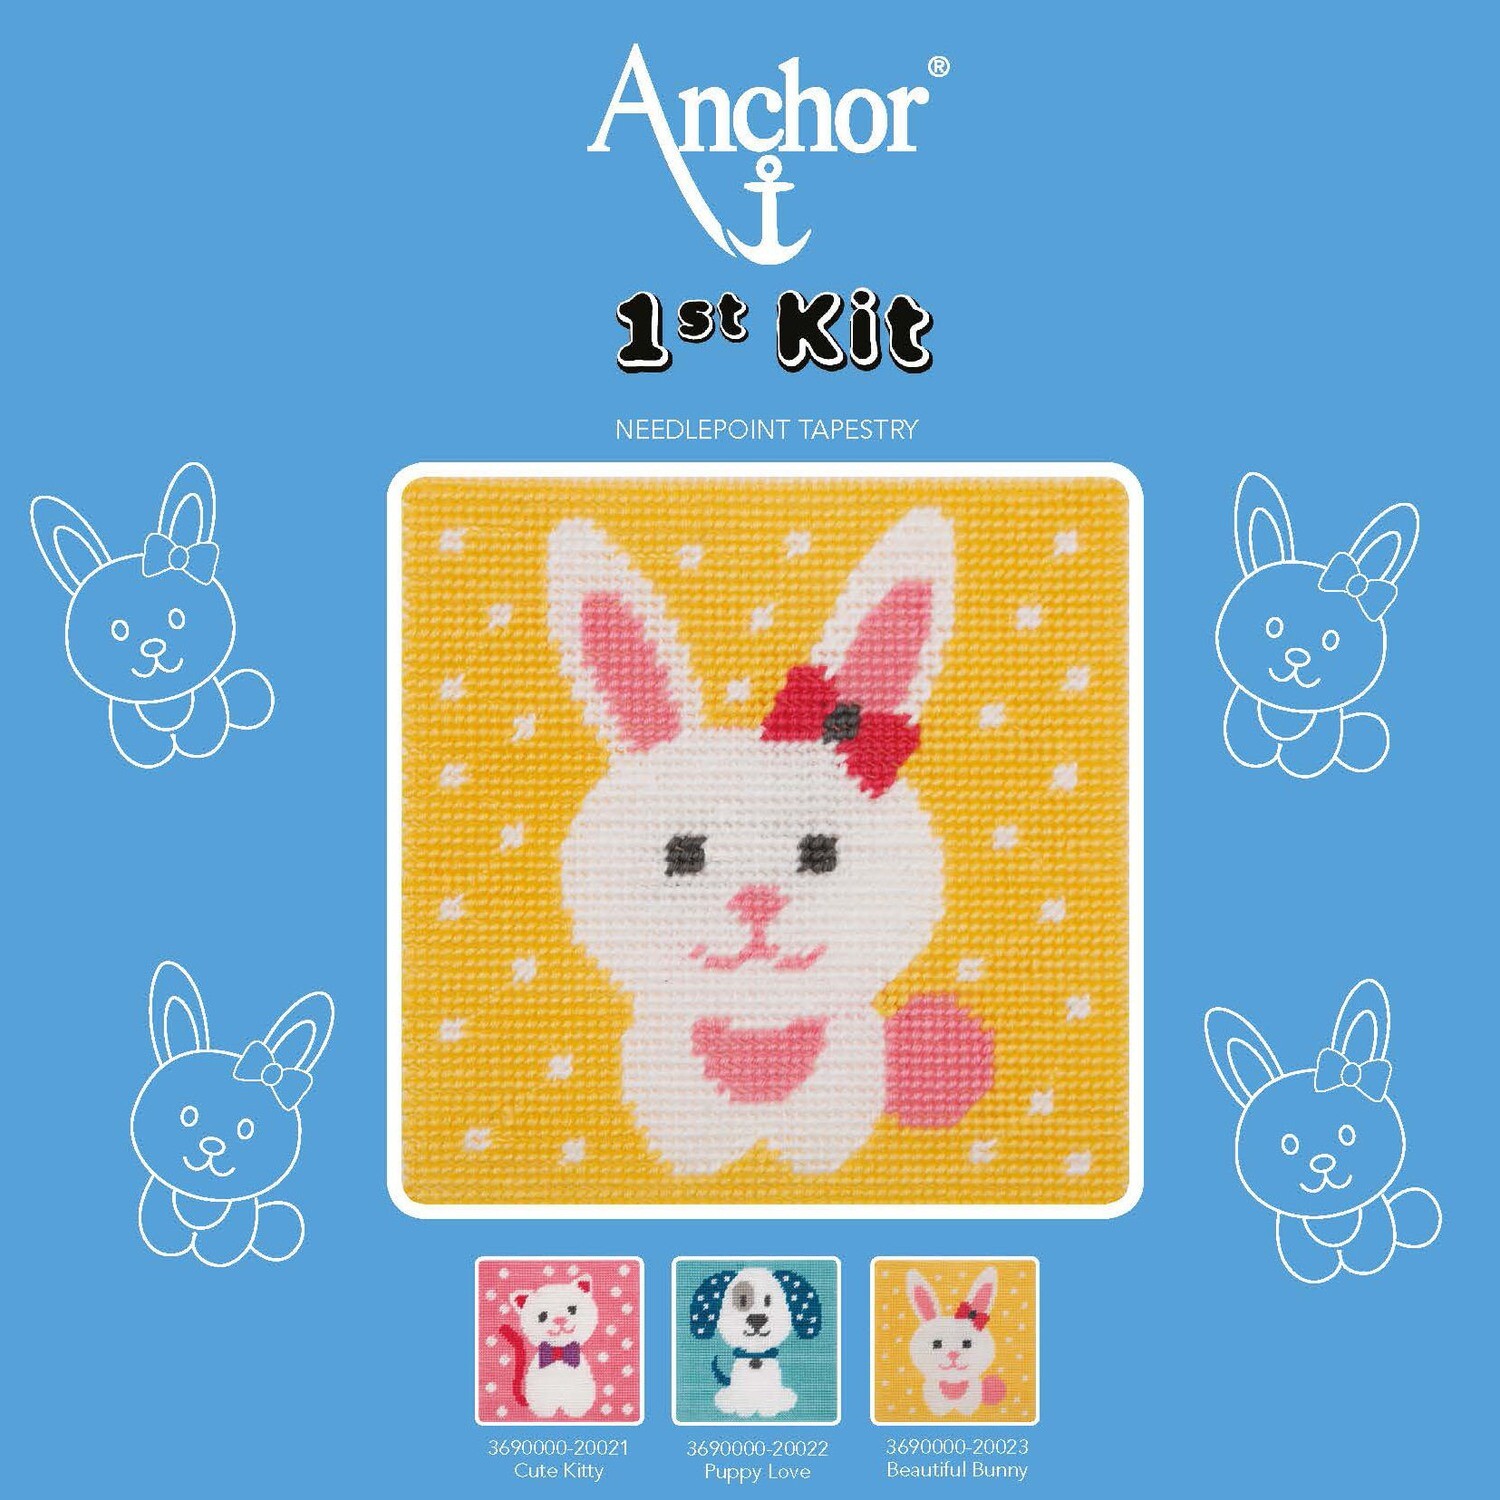 Anchor 1st Kit - Beautiful Bunny Tapestry